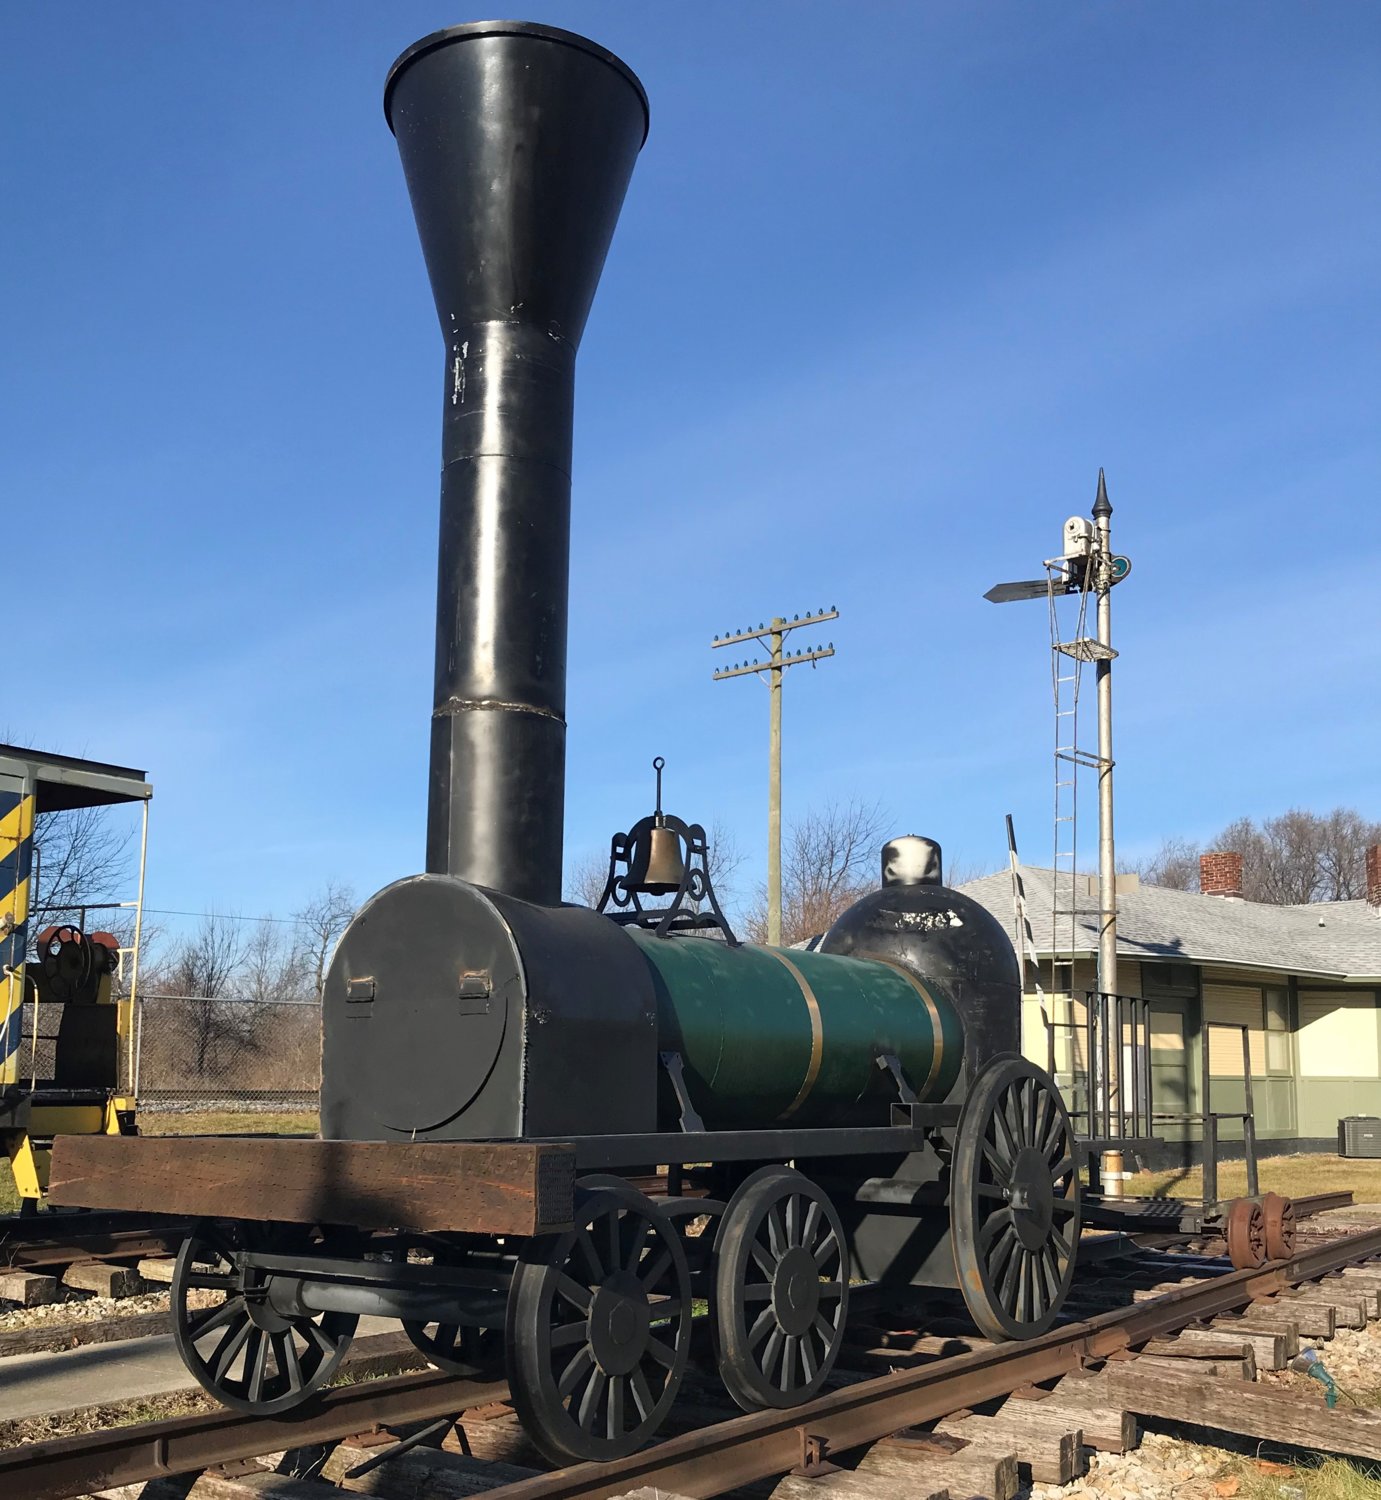 The 1837 Norris 4-2-0 steam engine, tender and passenger coach are on display at the Linden Depot Museum.